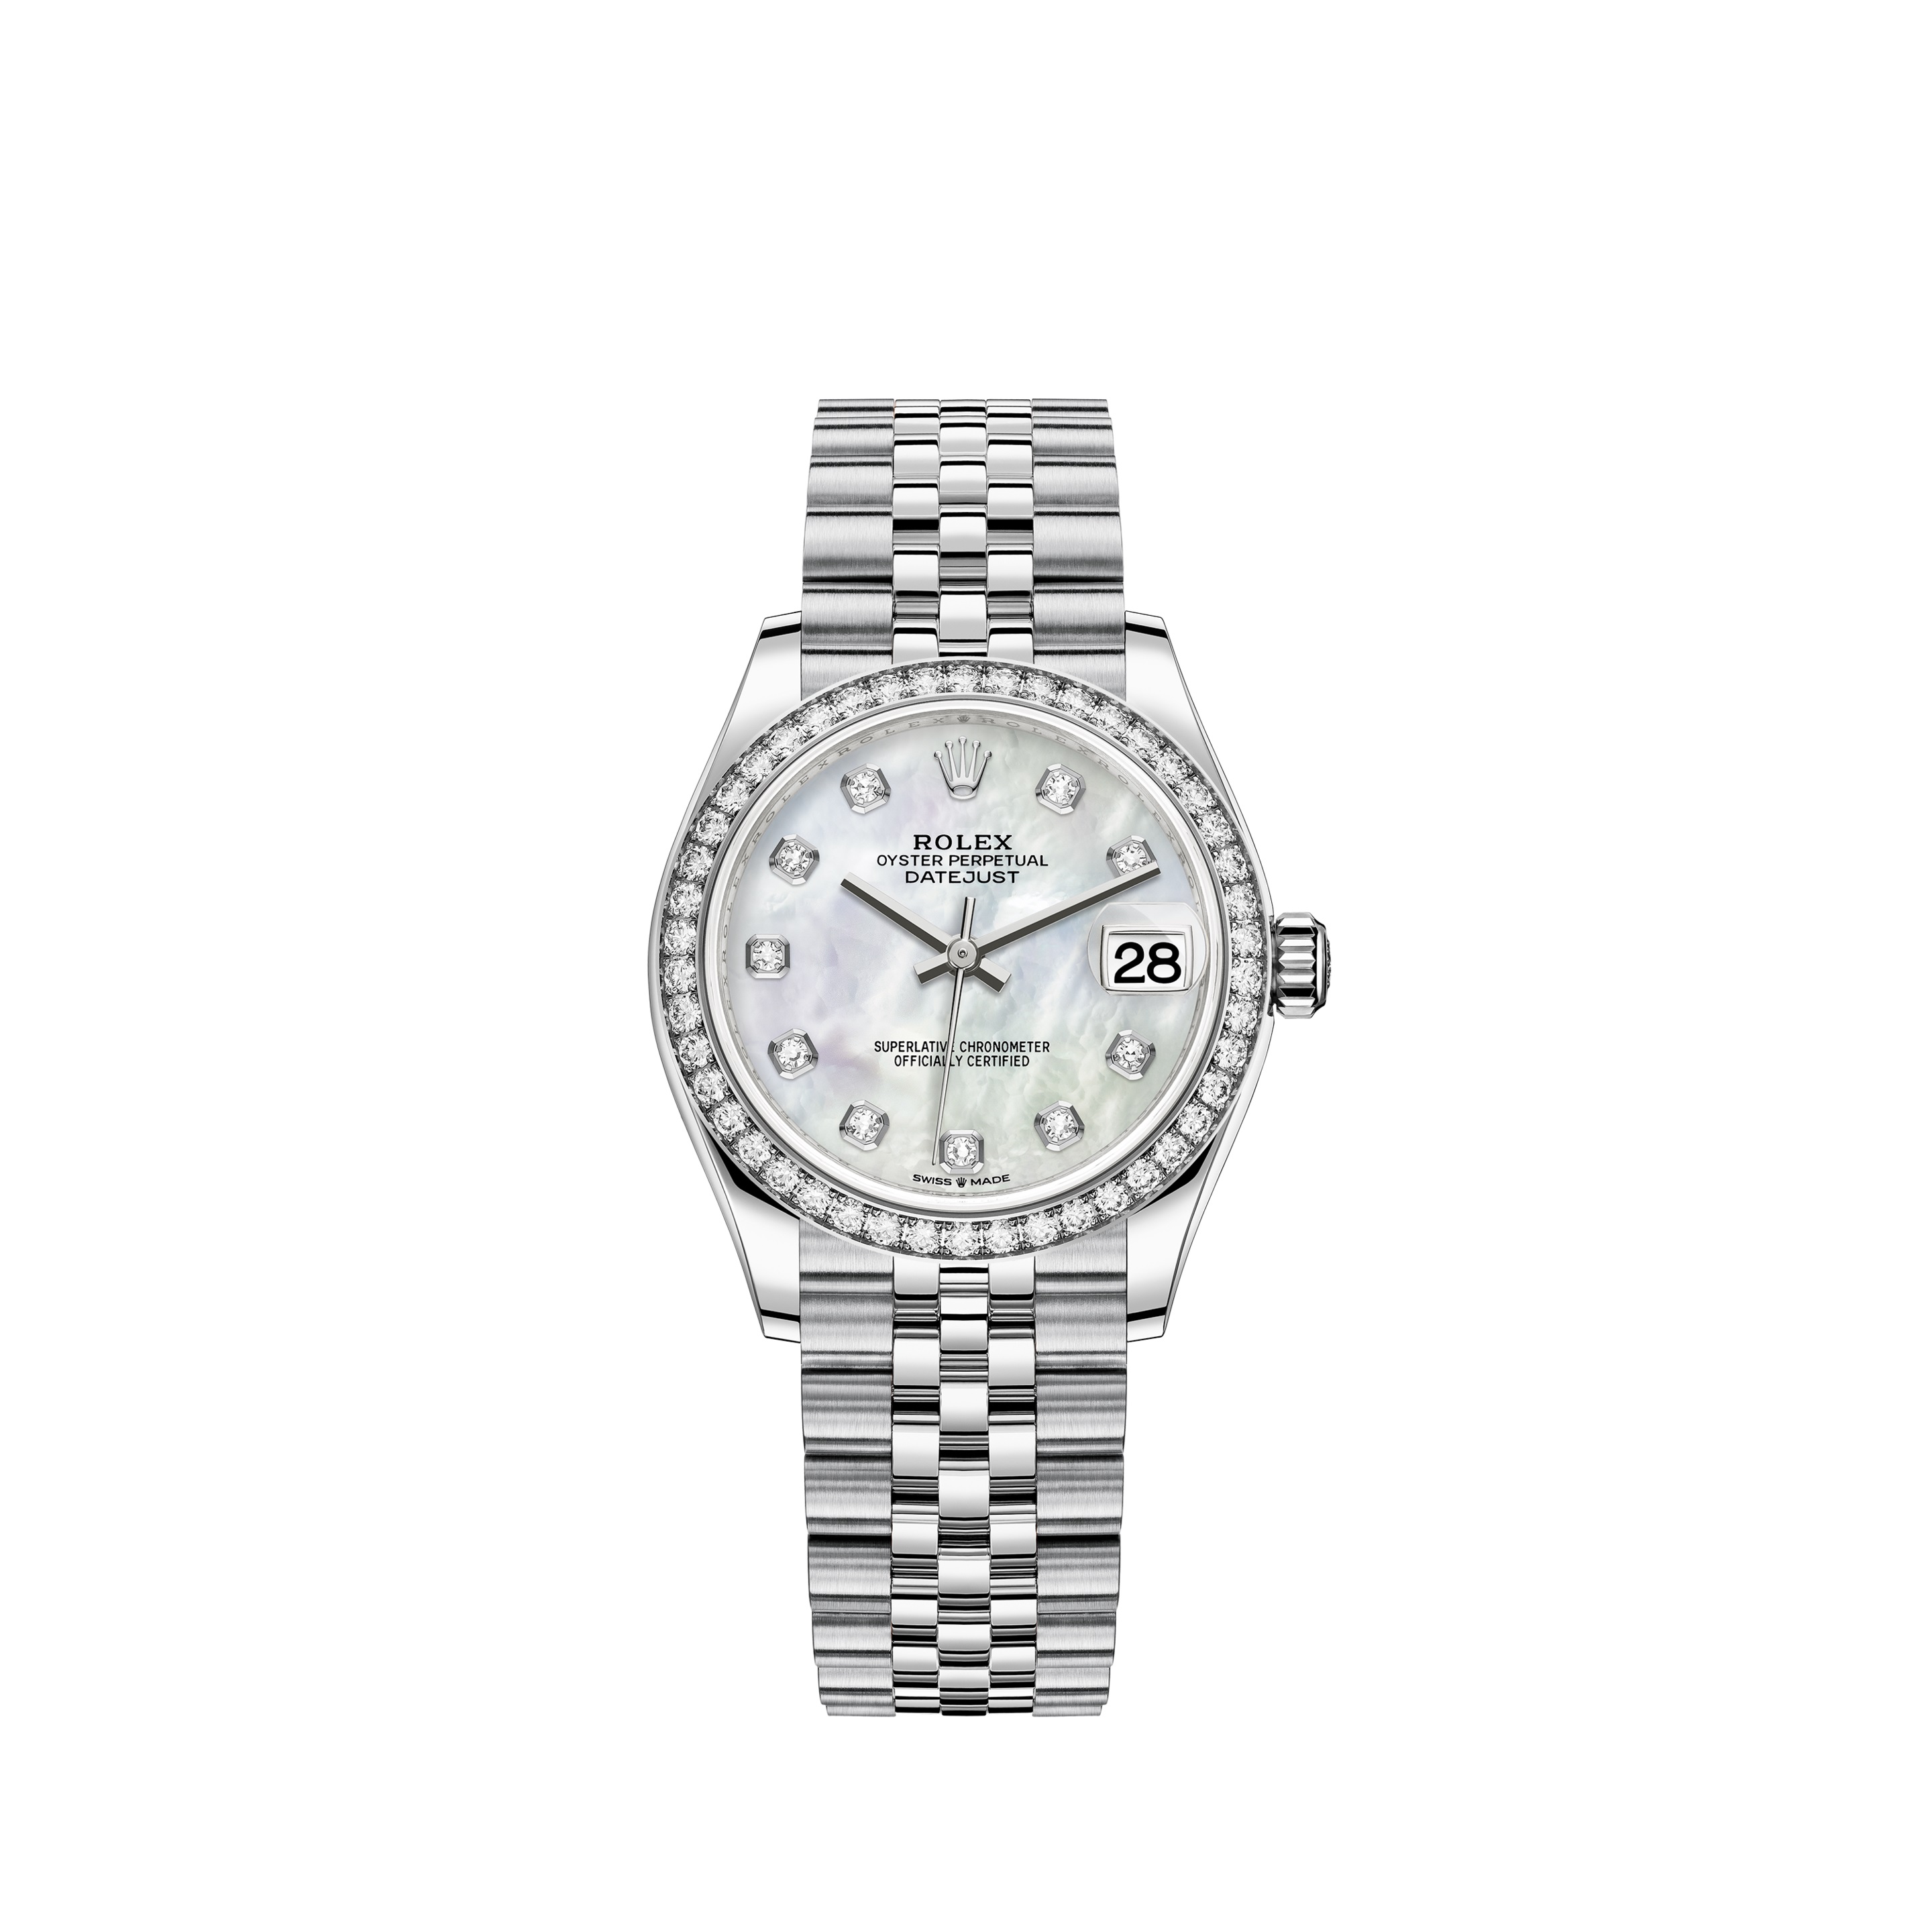 Datejust 31 278384RBR White Gold & Stainless Steel Watch (White Mother-of-Pearl Set with Diamonds)